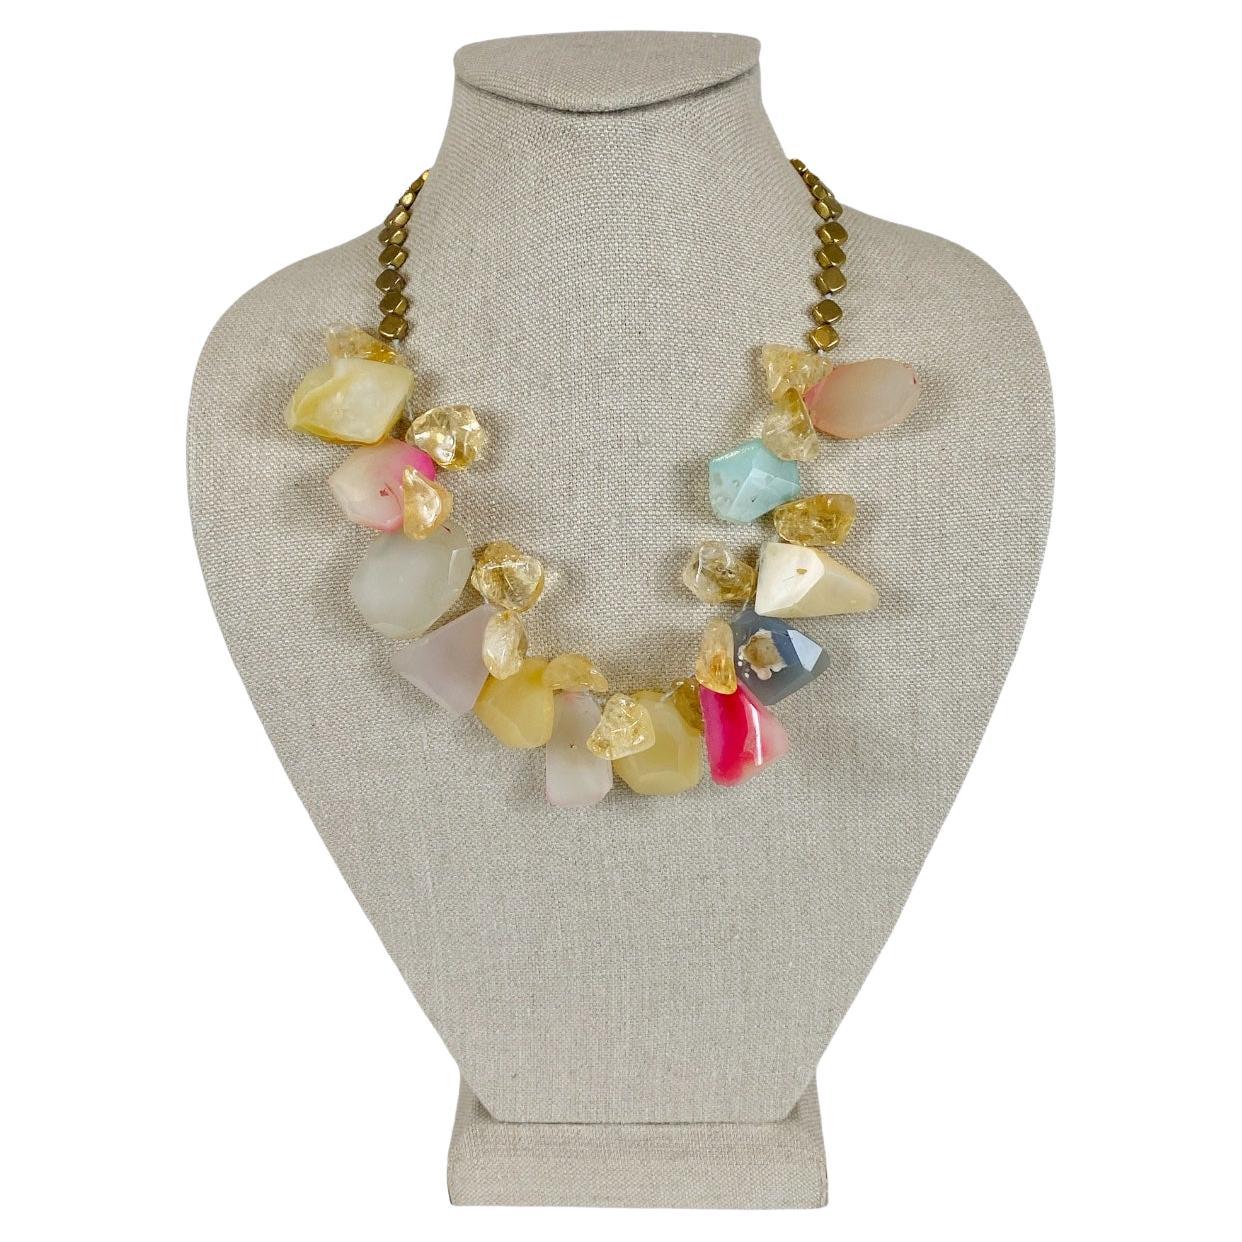 "Rock Candy" Multicolored Necklace